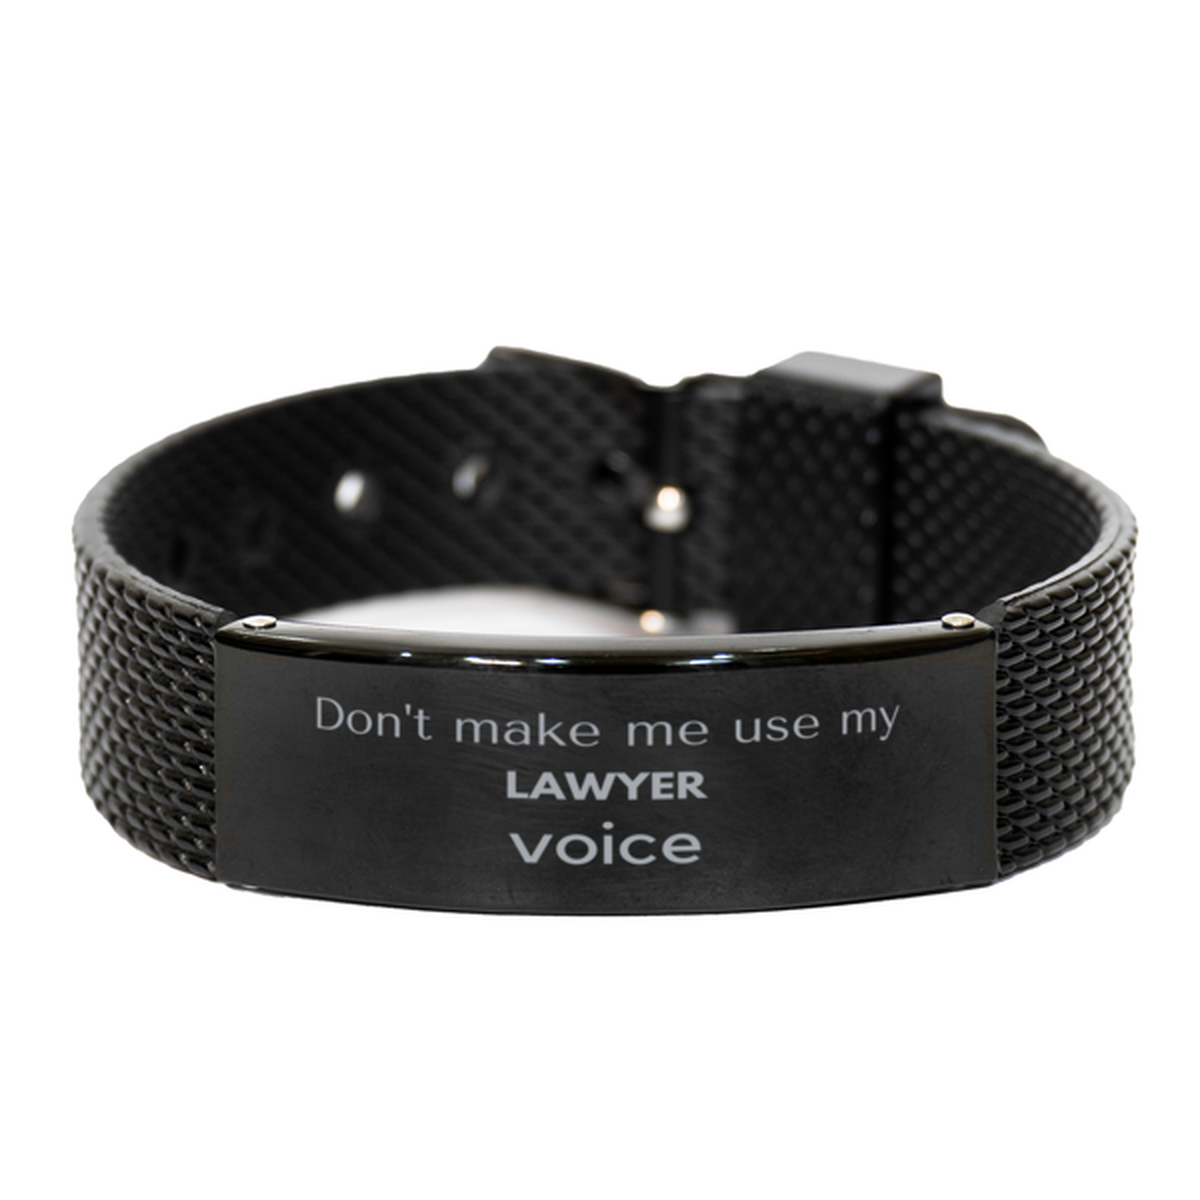 Don't make me use my Lawyer voice, Sarcasm Lawyer Gifts, Christmas Lawyer Black Shark Mesh Bracelet Birthday Unique Gifts For Lawyer Coworkers, Men, Women, Colleague, Friends